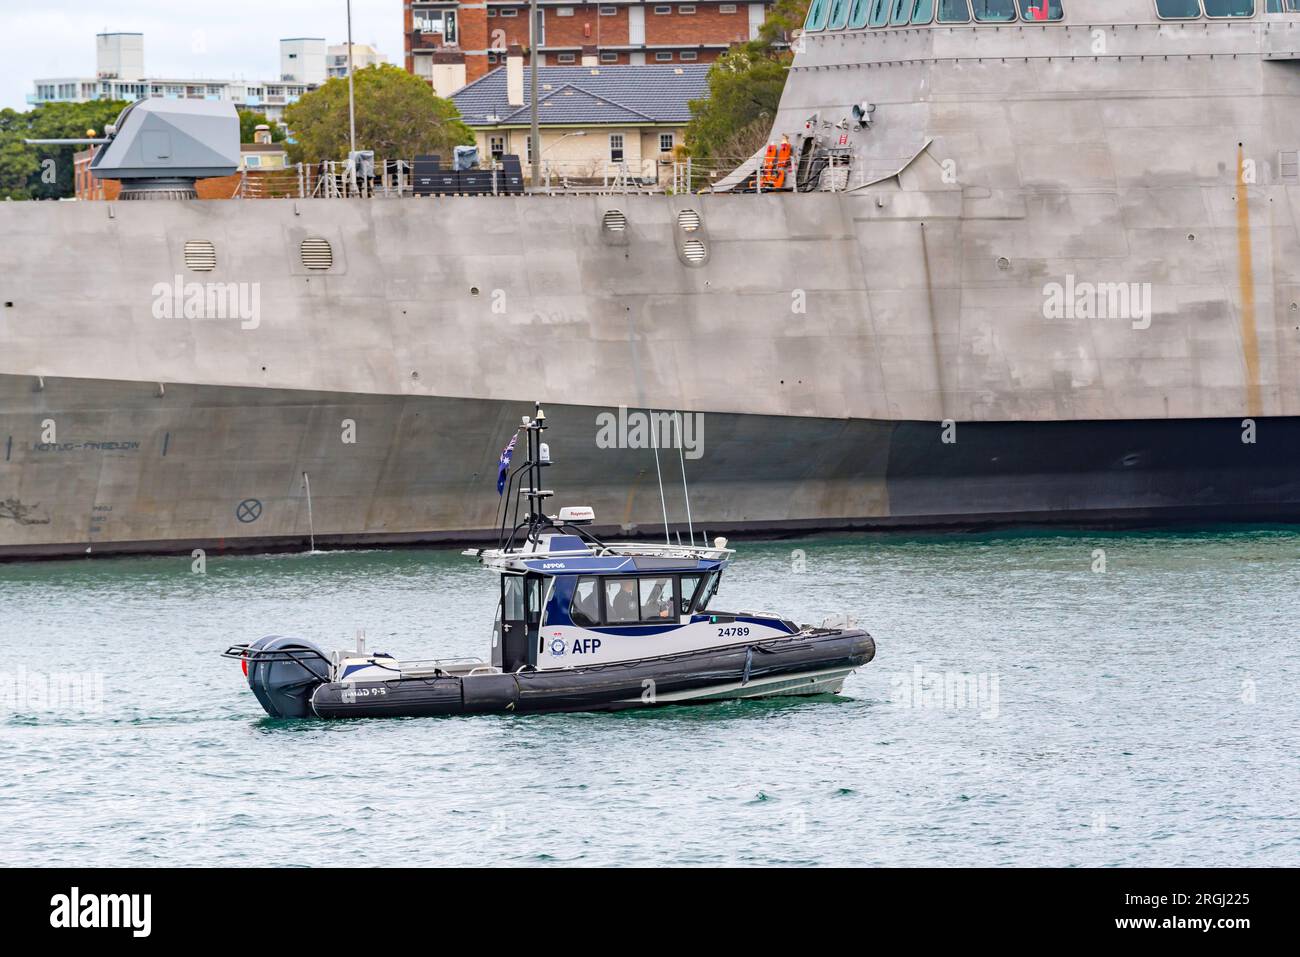 Members of the Australian Federal Police (AFP) patroling in a Naiad 9.5m boat beside the USS Canberra moored at Garden Island in Sydney, Australia Stock Photo